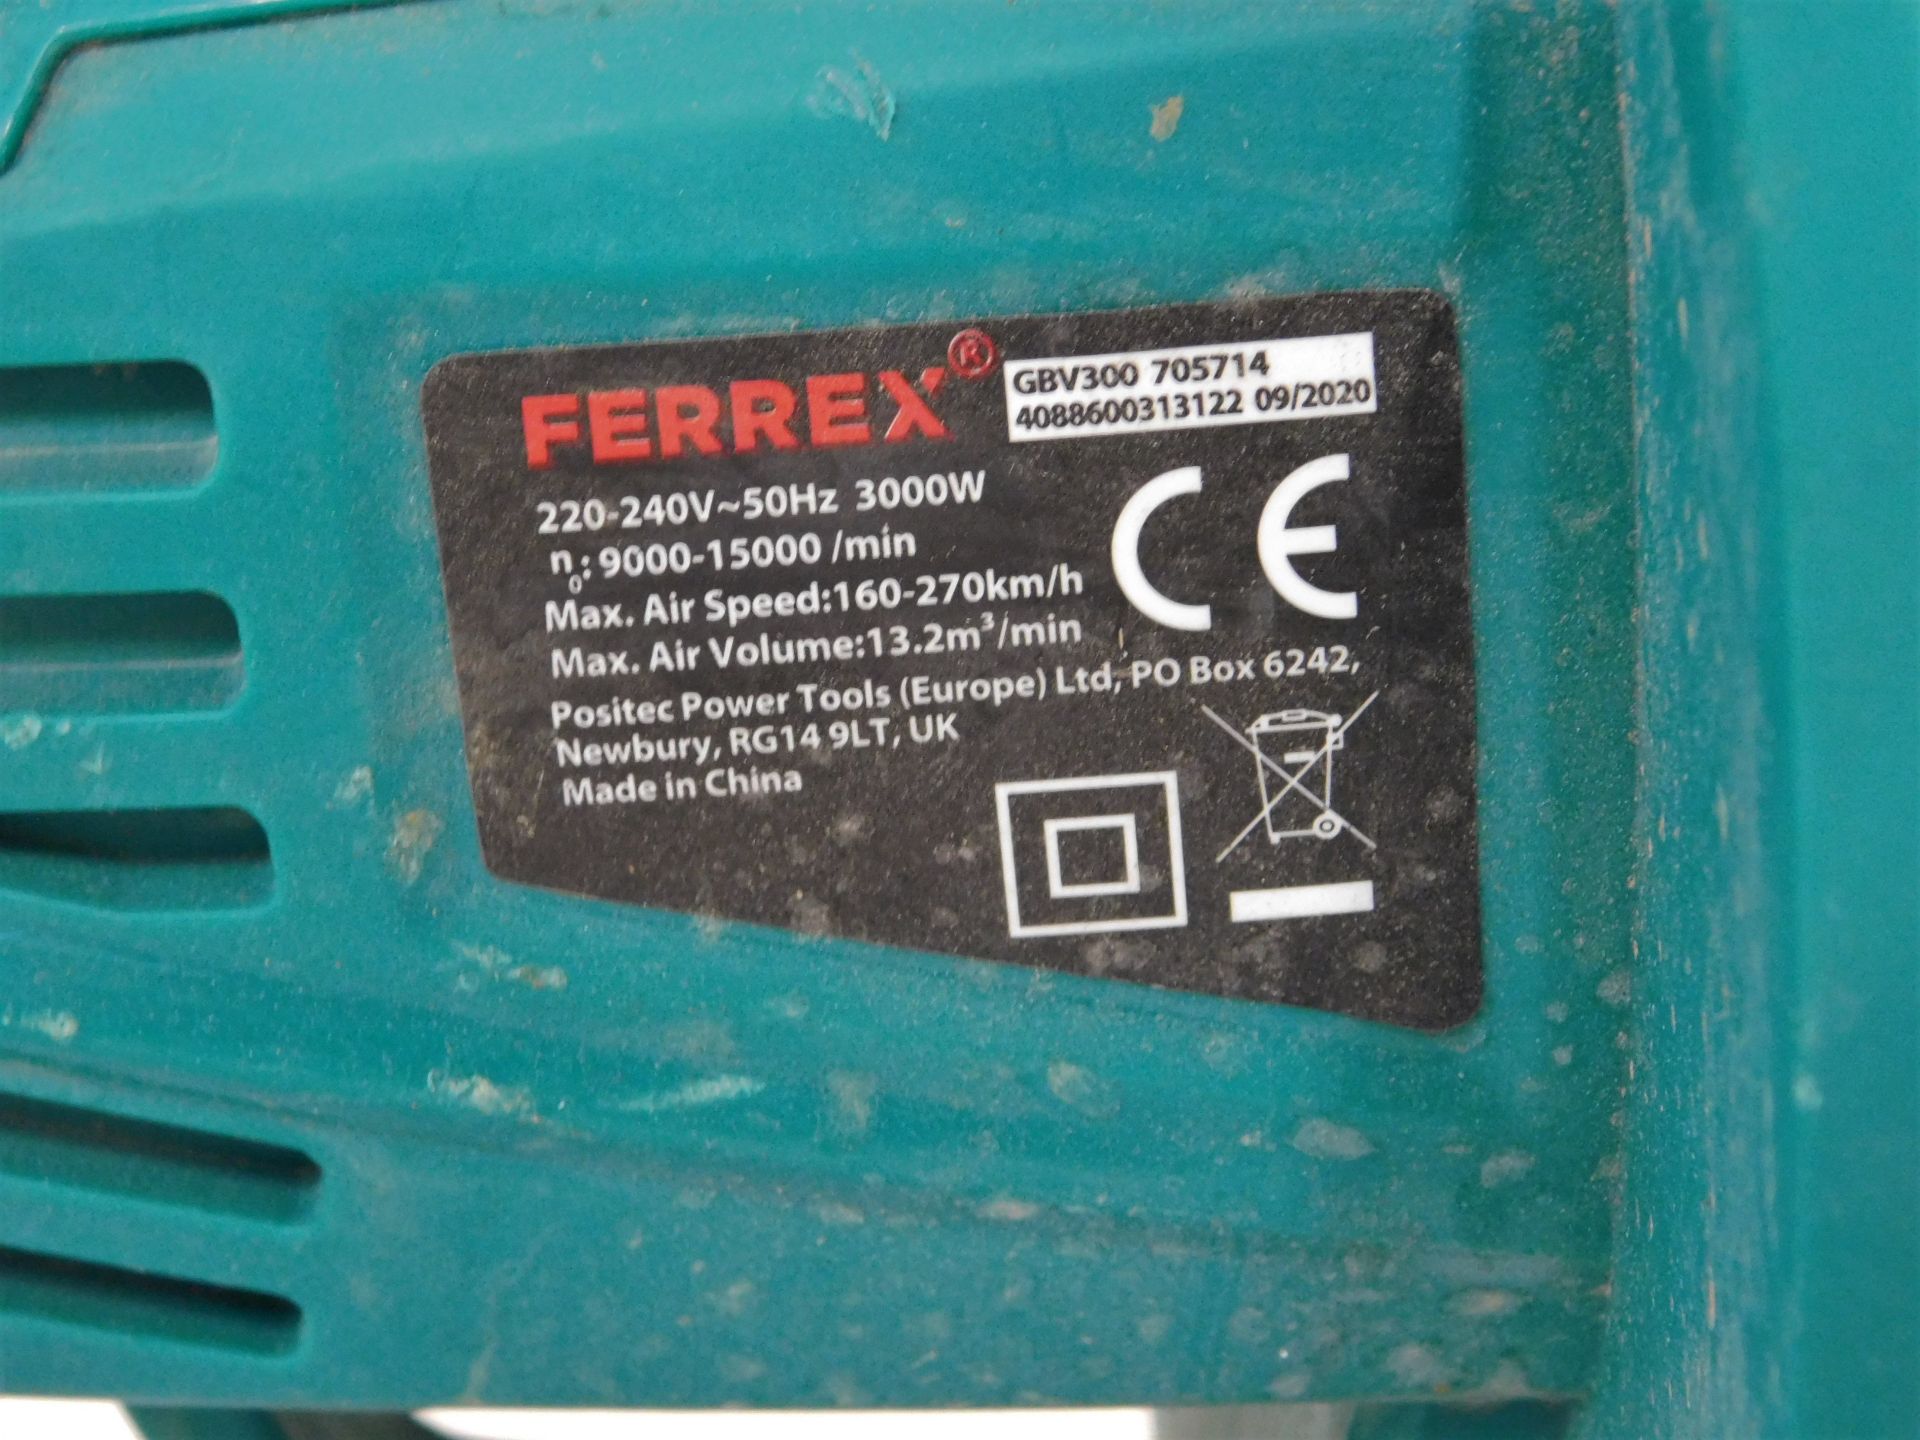 Ferrex Leaf Blower (Location: Brentwood. Please Refer to General Notes) - Image 2 of 2